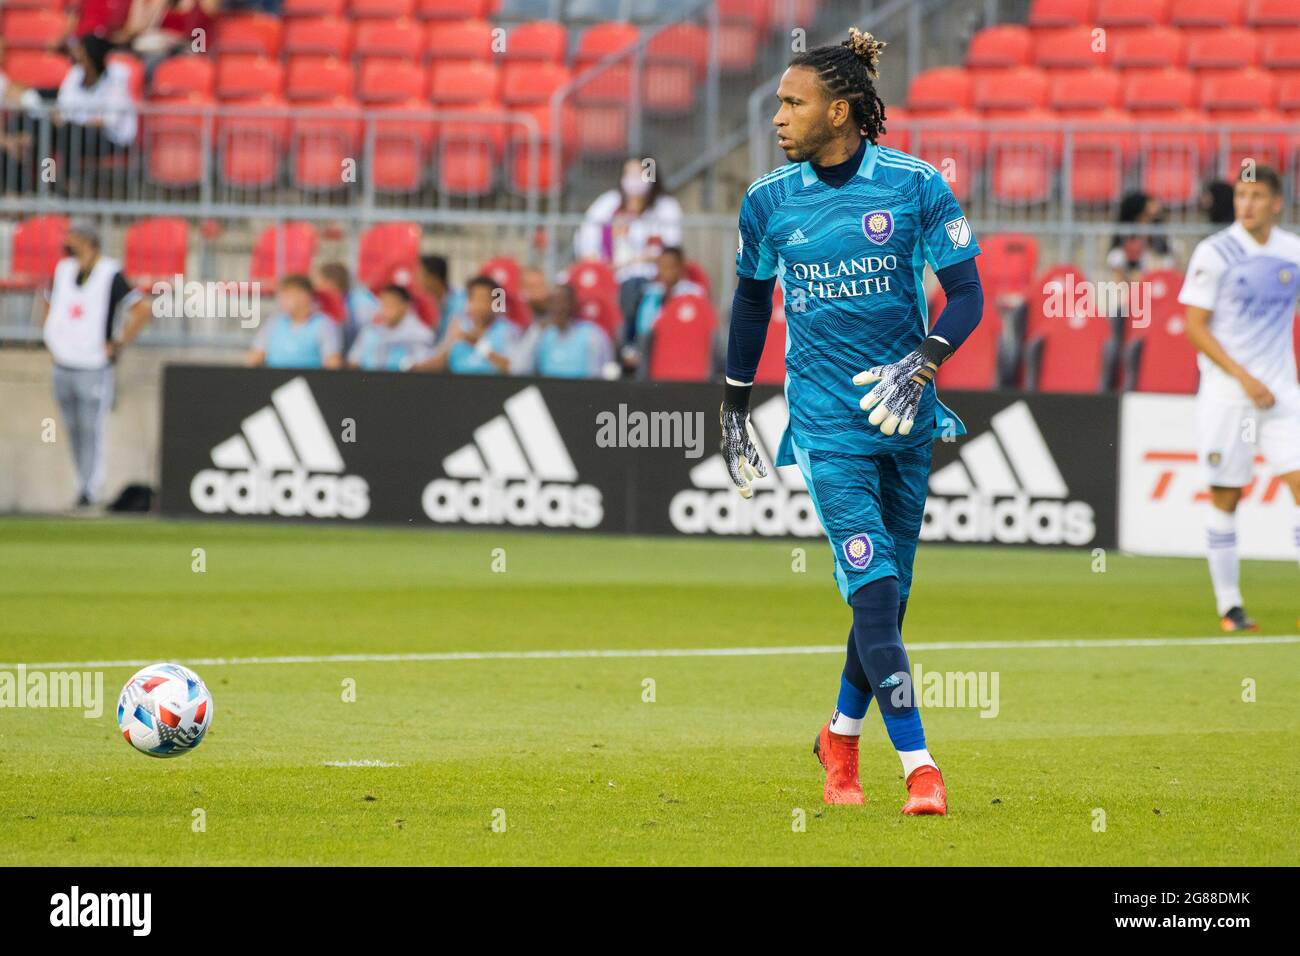 Toronto, Canada. 17th July, 2021. Pedro Gallese (1) in action during the MLS game between between Toronto FC and Orlando City SC at BMO Field. (Final score; Toronto FC 1-1 Orlando City SC). (Photo by Angel Marchini/SOPA Images/Sipa USA) Credit: Sipa USA/Alamy Live News Stock Photo